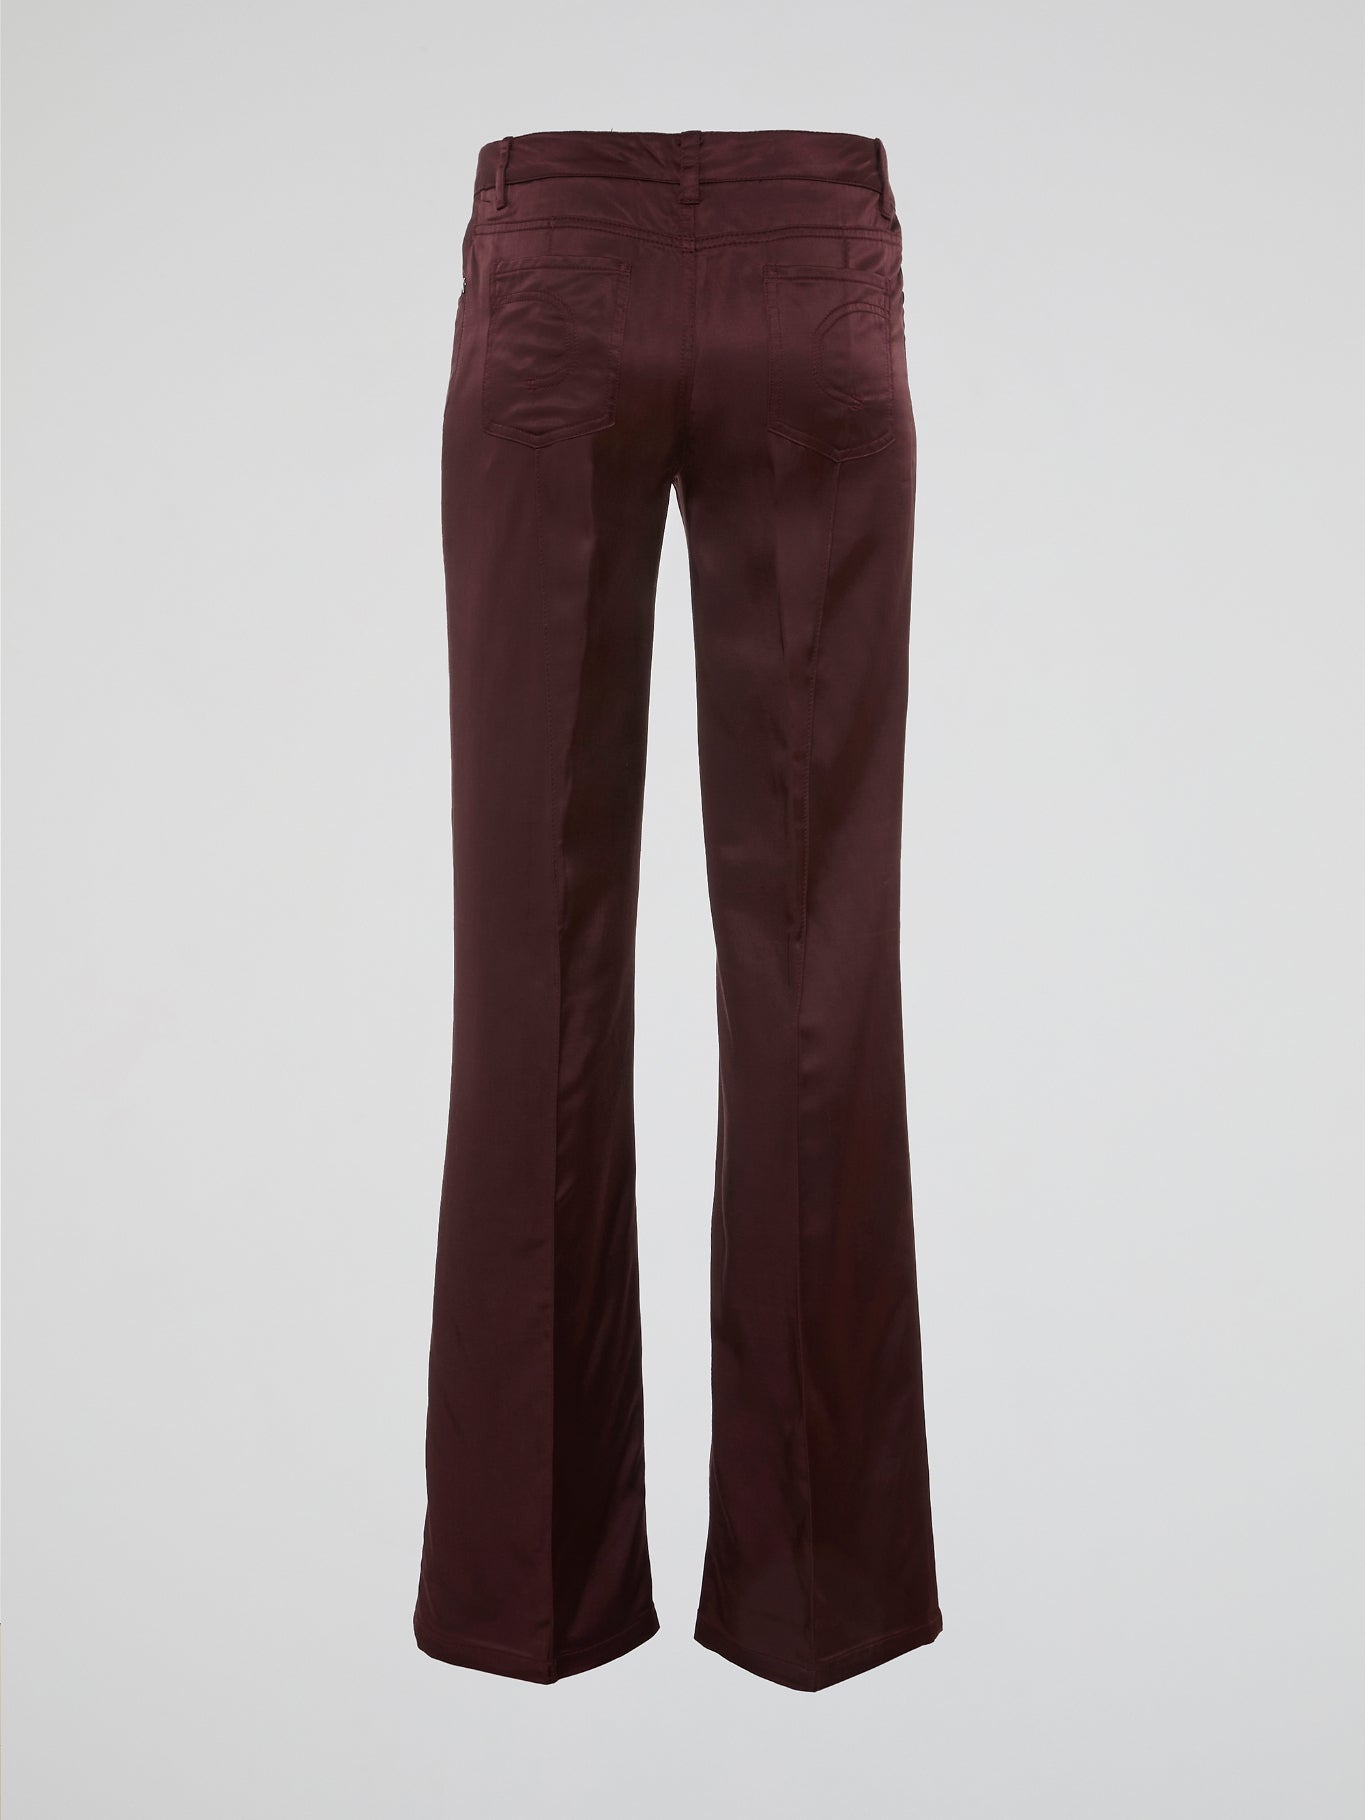 Step up your fashion game with these Burgundy Flared Pants by Clas Roberto Cavalli. Crafted from luxurious materials, these pants offer a sleek and chic silhouette with a touch of retro flair. Perfect for both formal and casual occasions, they effortlessly elevate any outfit, making you the style icon wherever you go.